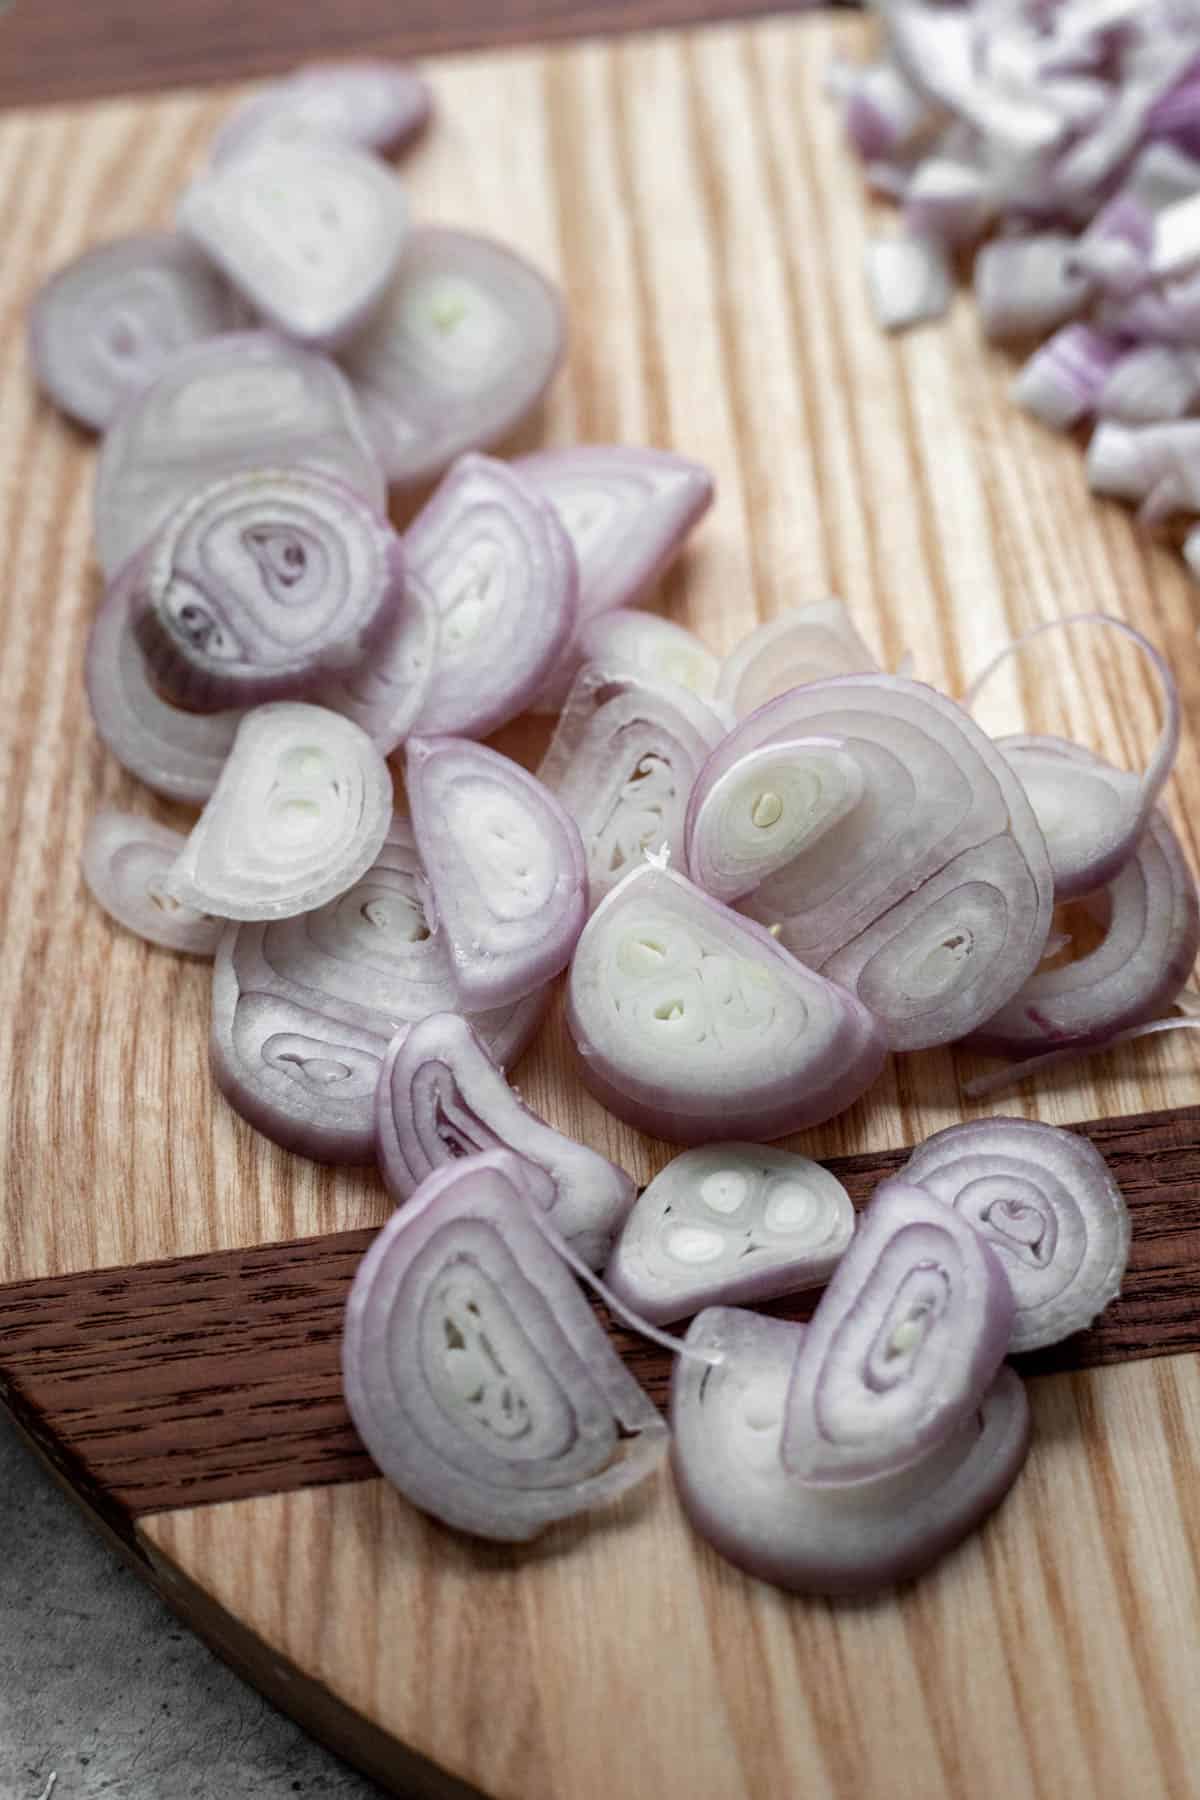 Rings of sliced shallots on a cutting board.